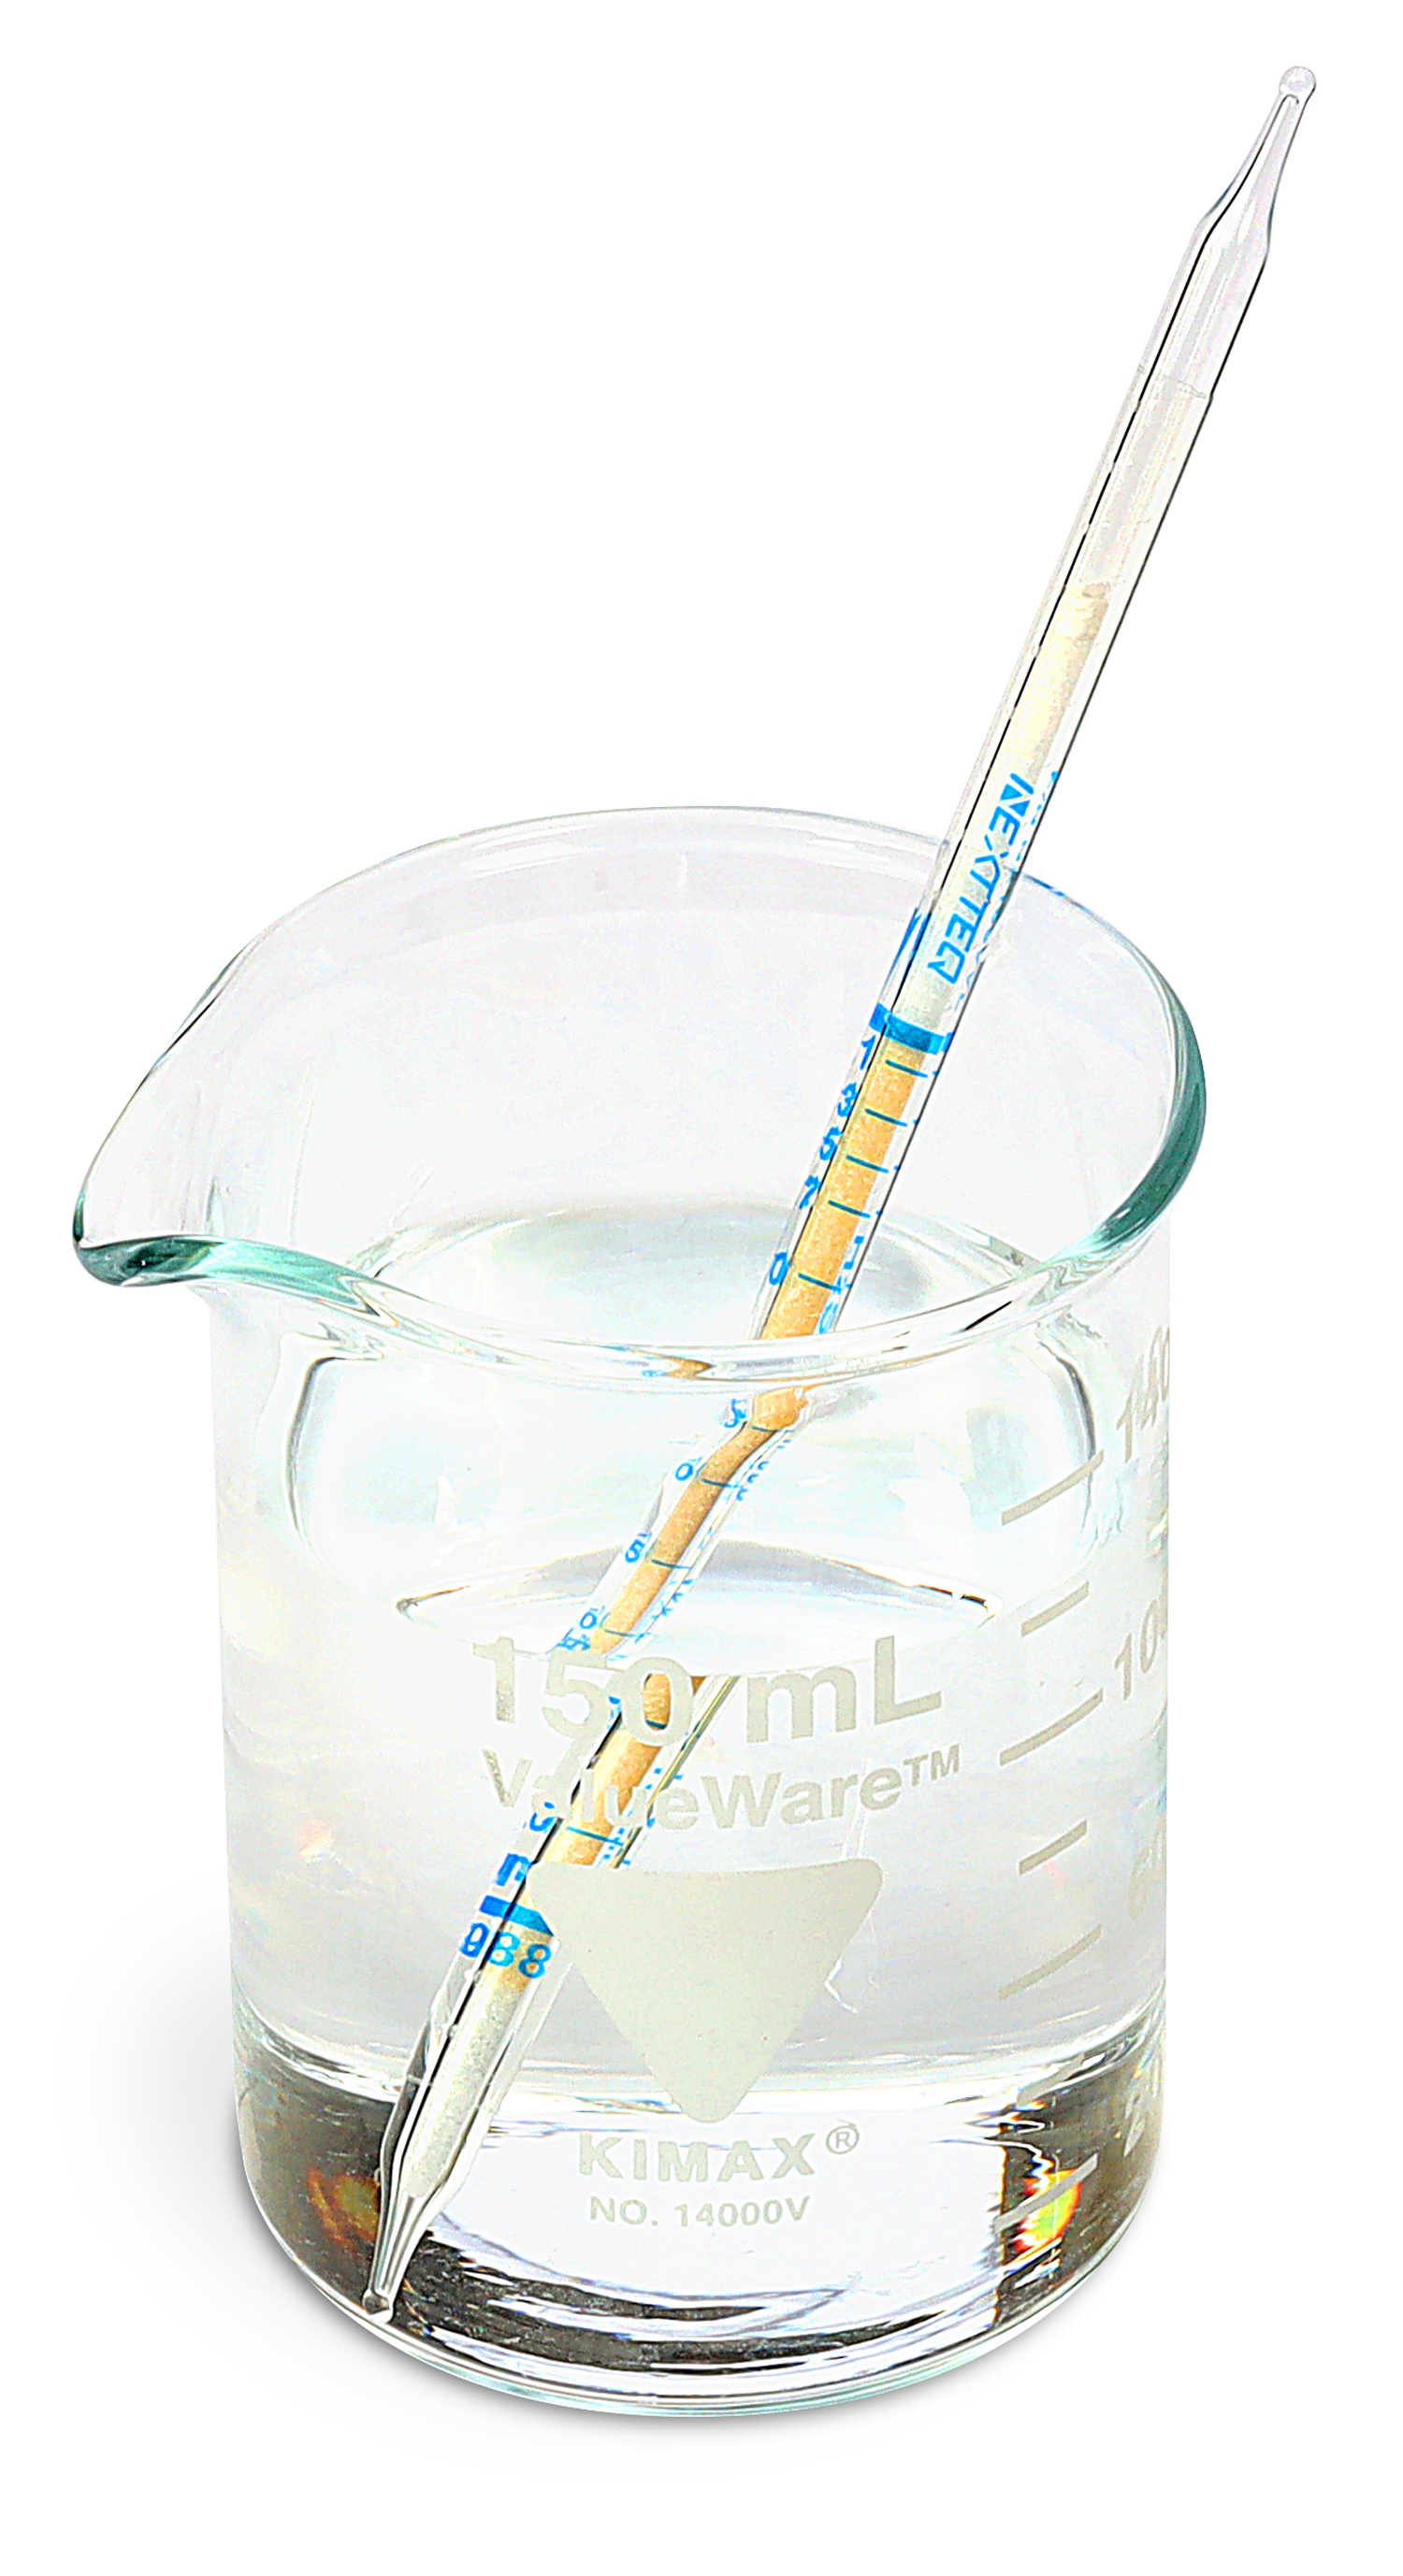 A Nextteq® brand-labeled solution detector tube in a beaker of liquid.